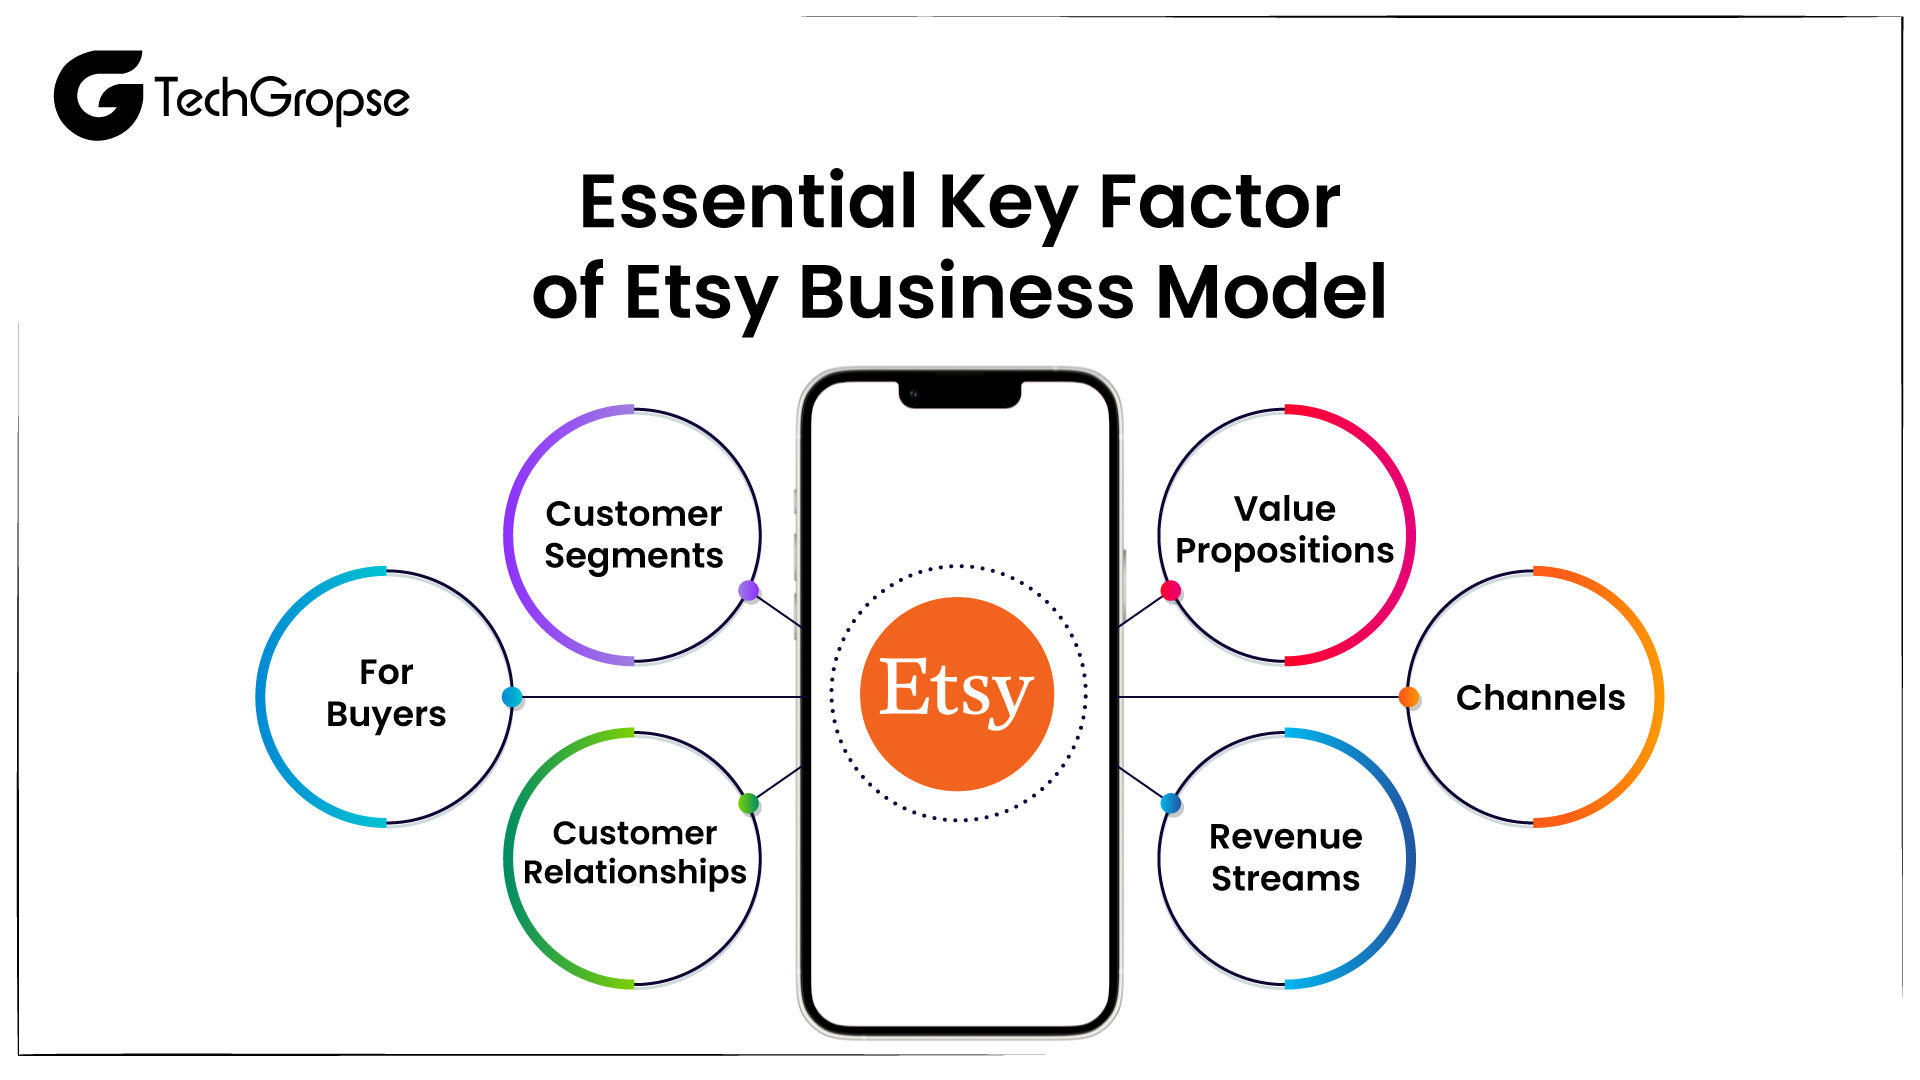 Essential Key Factor of Etsy Business Model